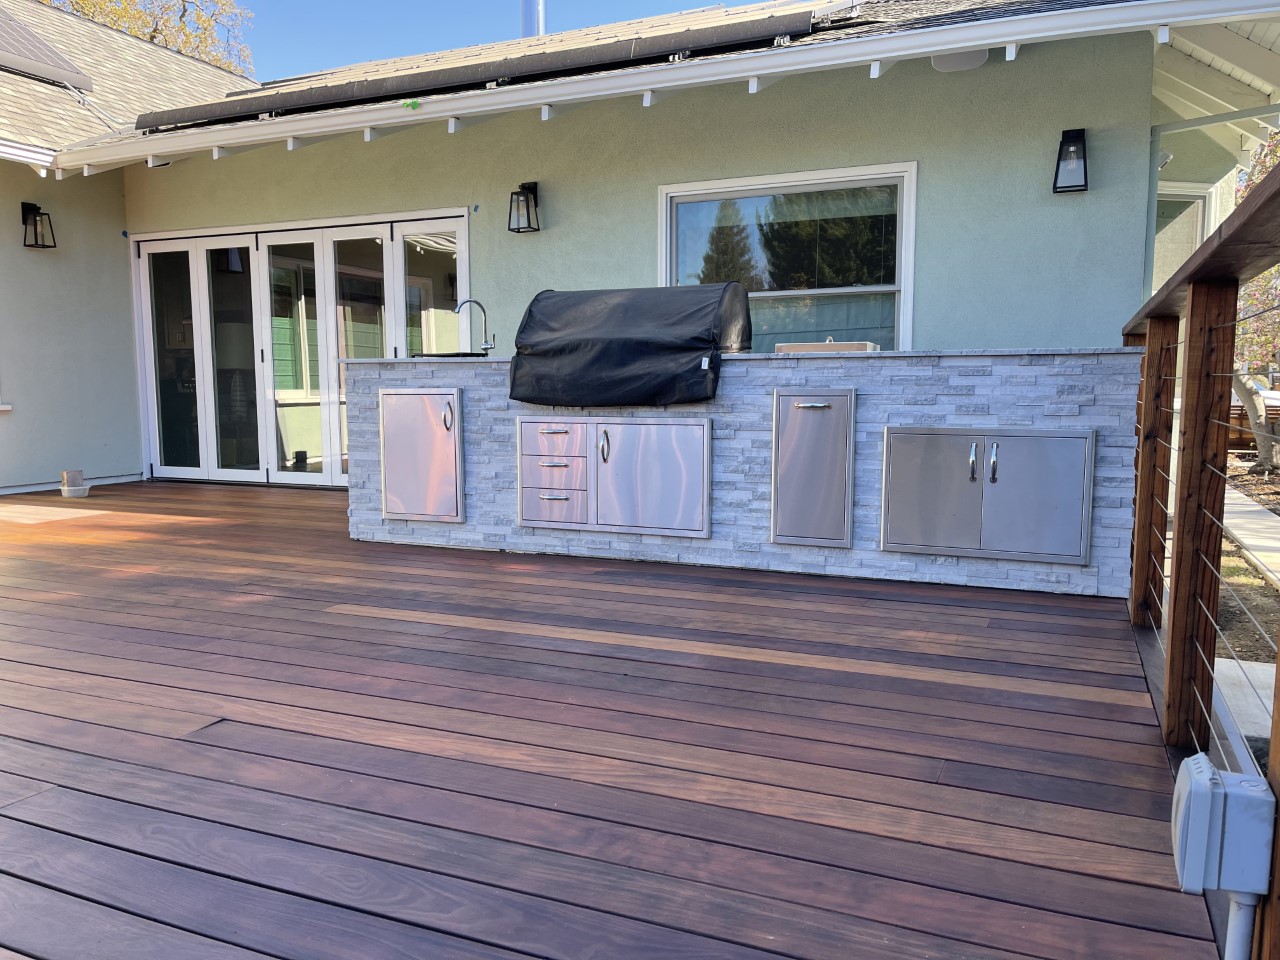 Custom deck built for outdoor kitchen and BBQ by Jack Cannon General Contractor with Lynstar Enterprises